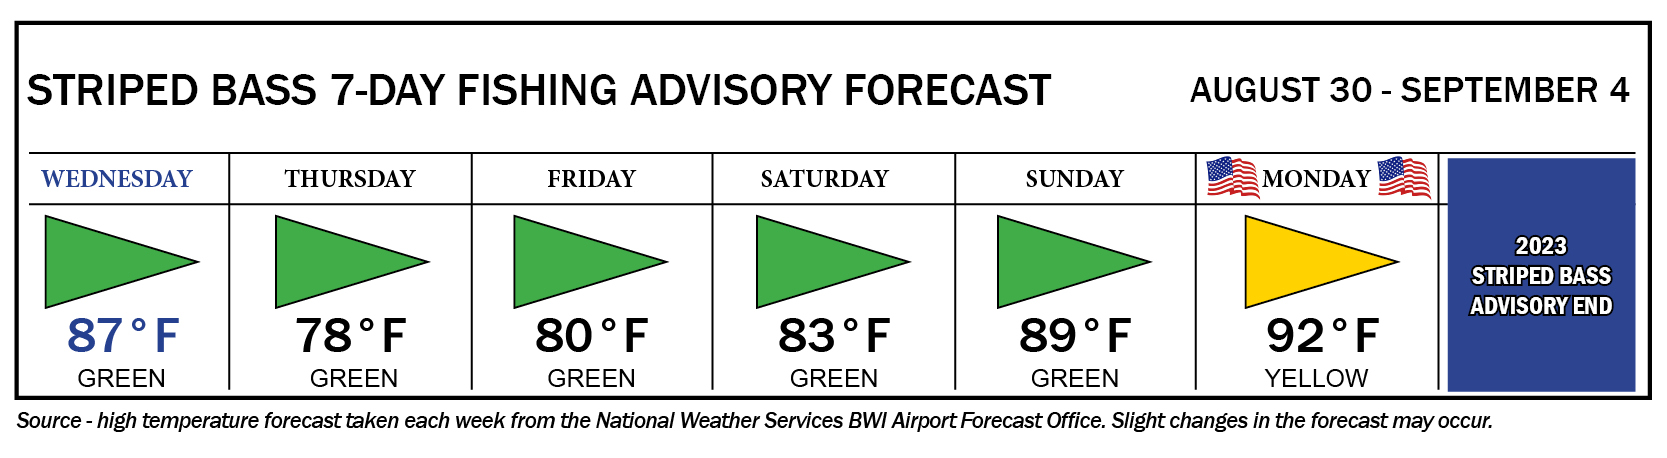 Image of Striped Bass 7-Day Fishing Advisory Forecast, showing a green flag day on Saturday; yellow flag days on Wednesday, Friday, Sunday, Monday, and Tuesday; and a red flag day on Thursday.